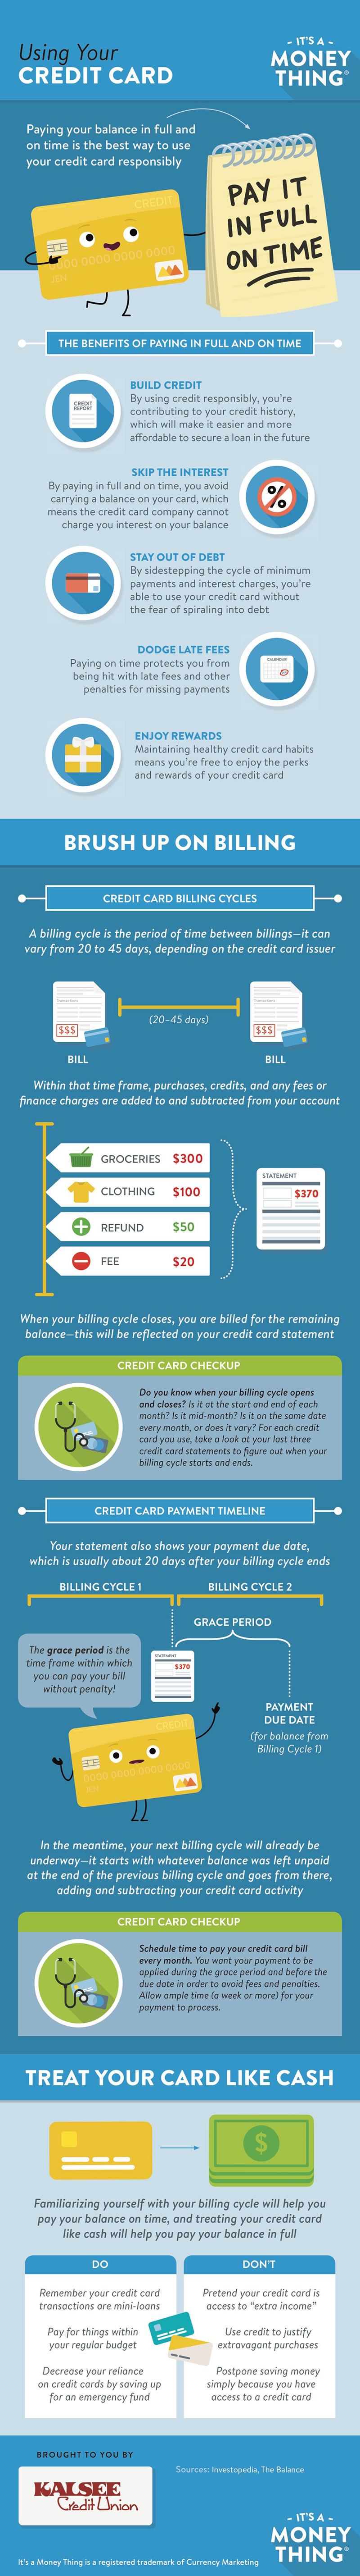 using your credit card infographic, click for transcription